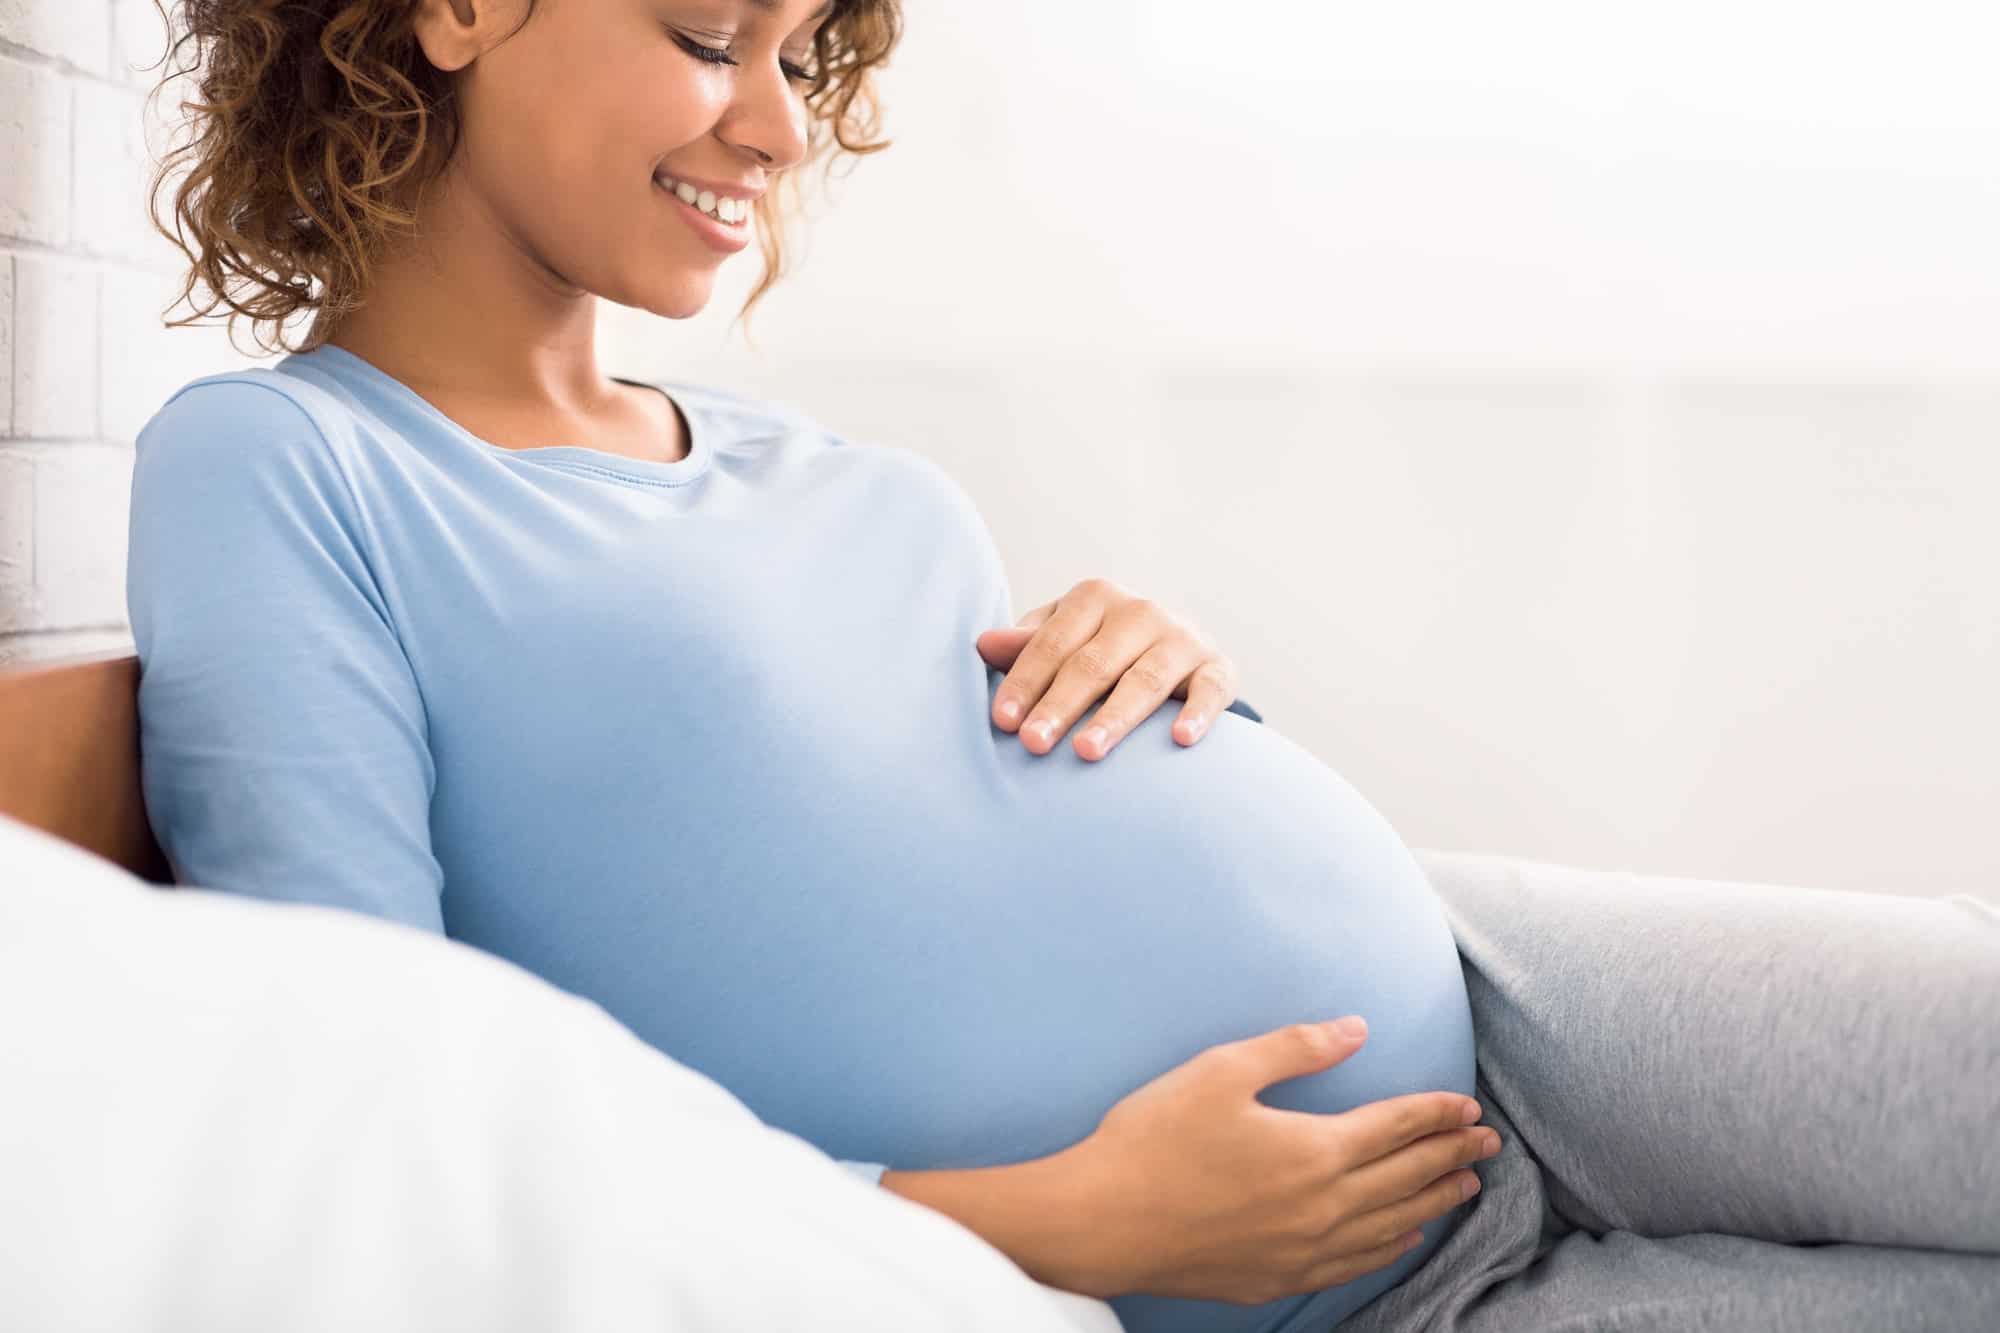 Vaginal Discharge During Pregnancy: What’s Safe and What Isn’t?